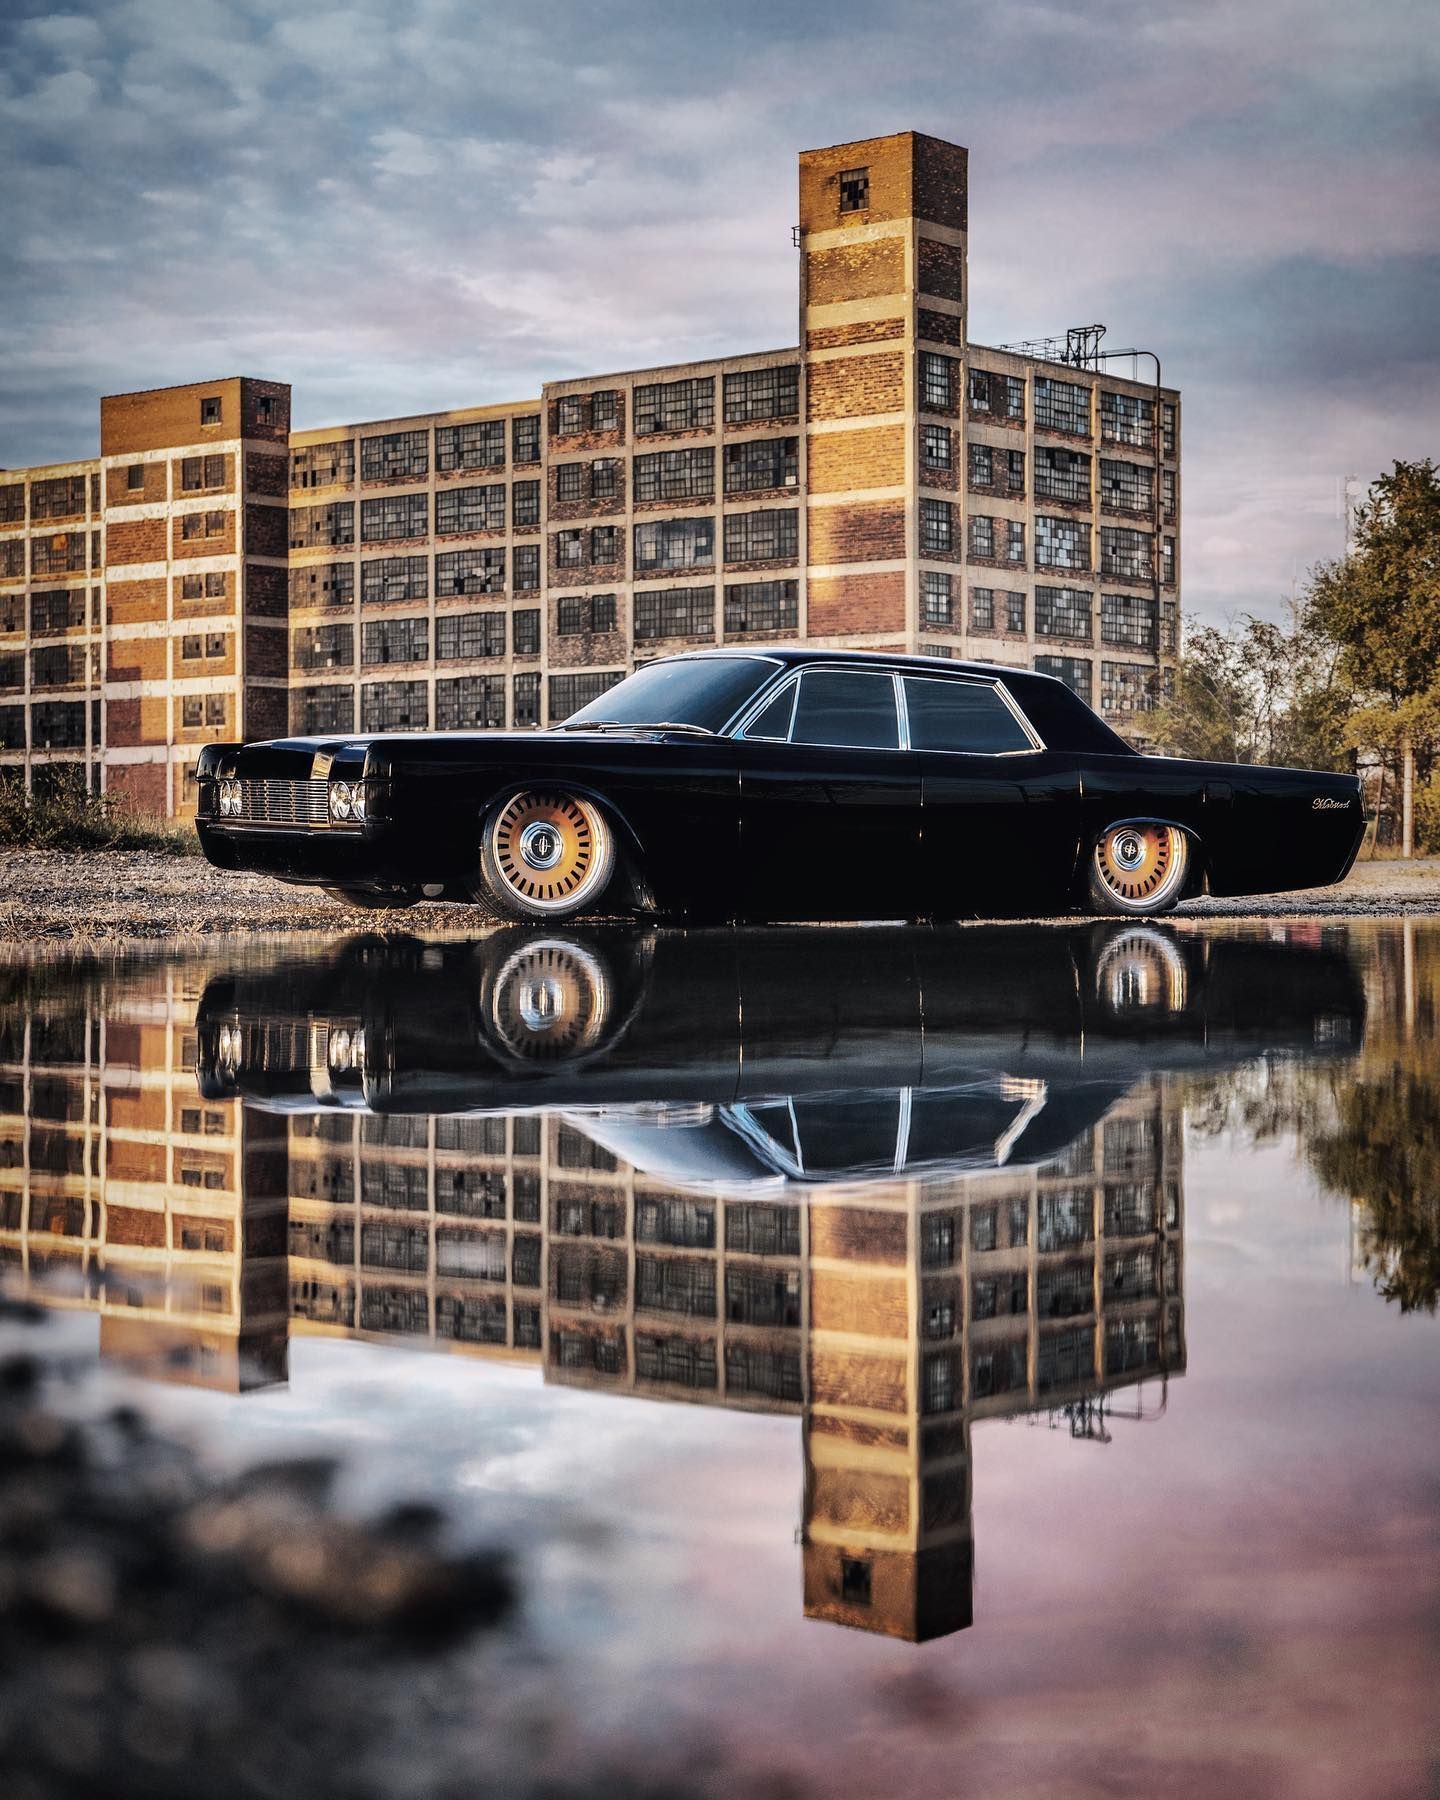 Check Out This Custom 1968 Lincoln Continental By Roush And MobSteel